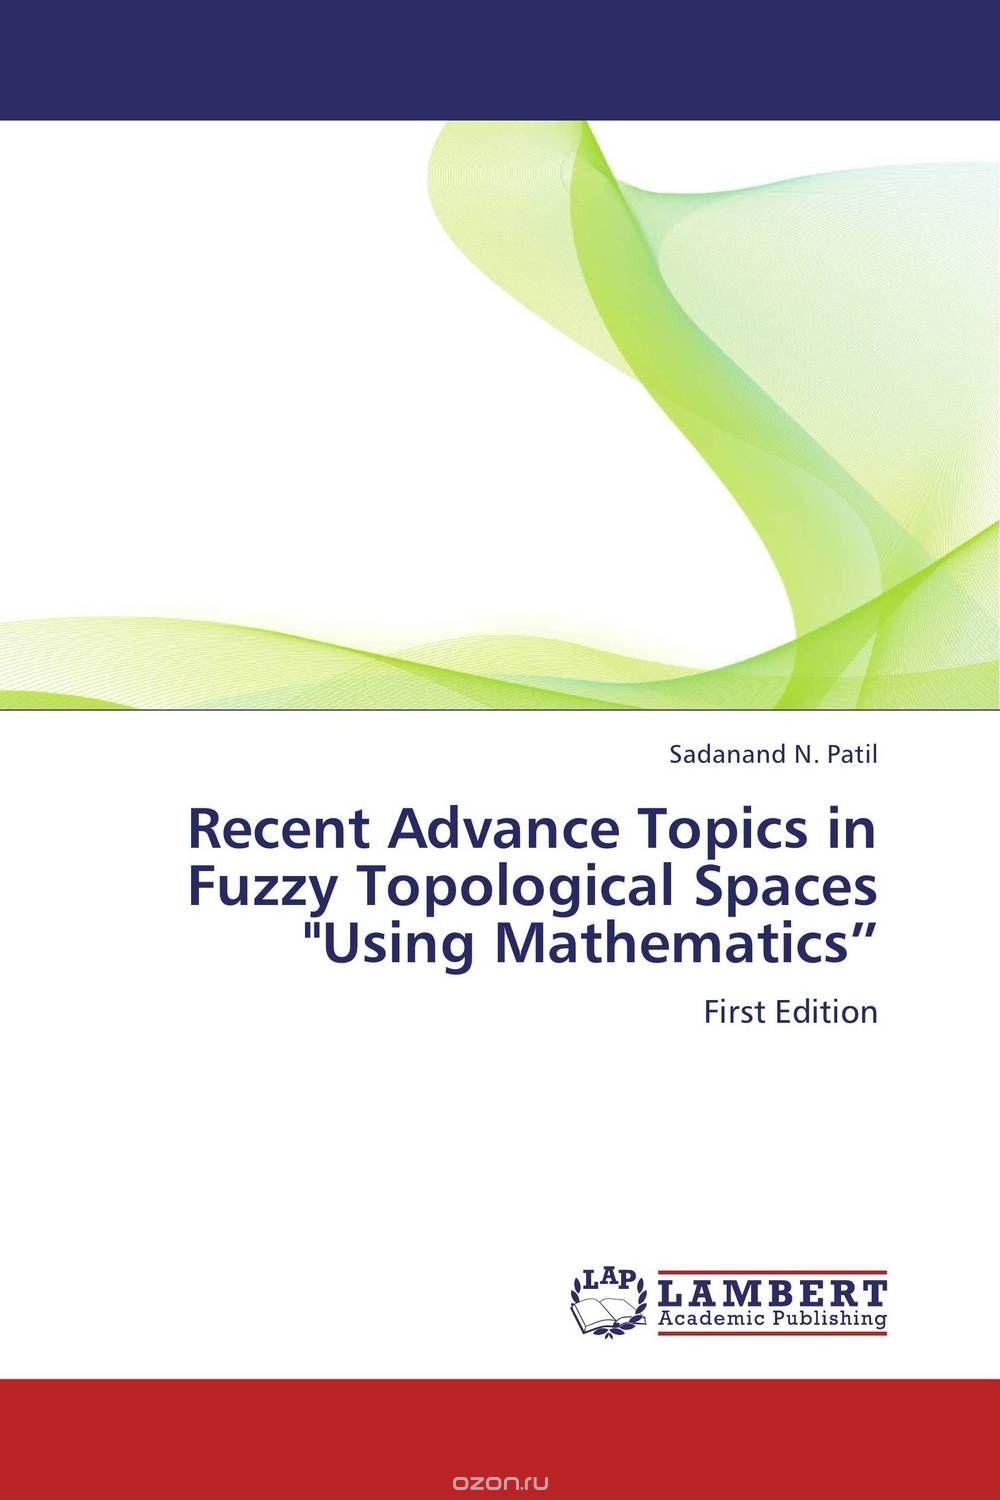 Recent Advance Topics in Fuzzy Topological Spaces "Using Mathematics”